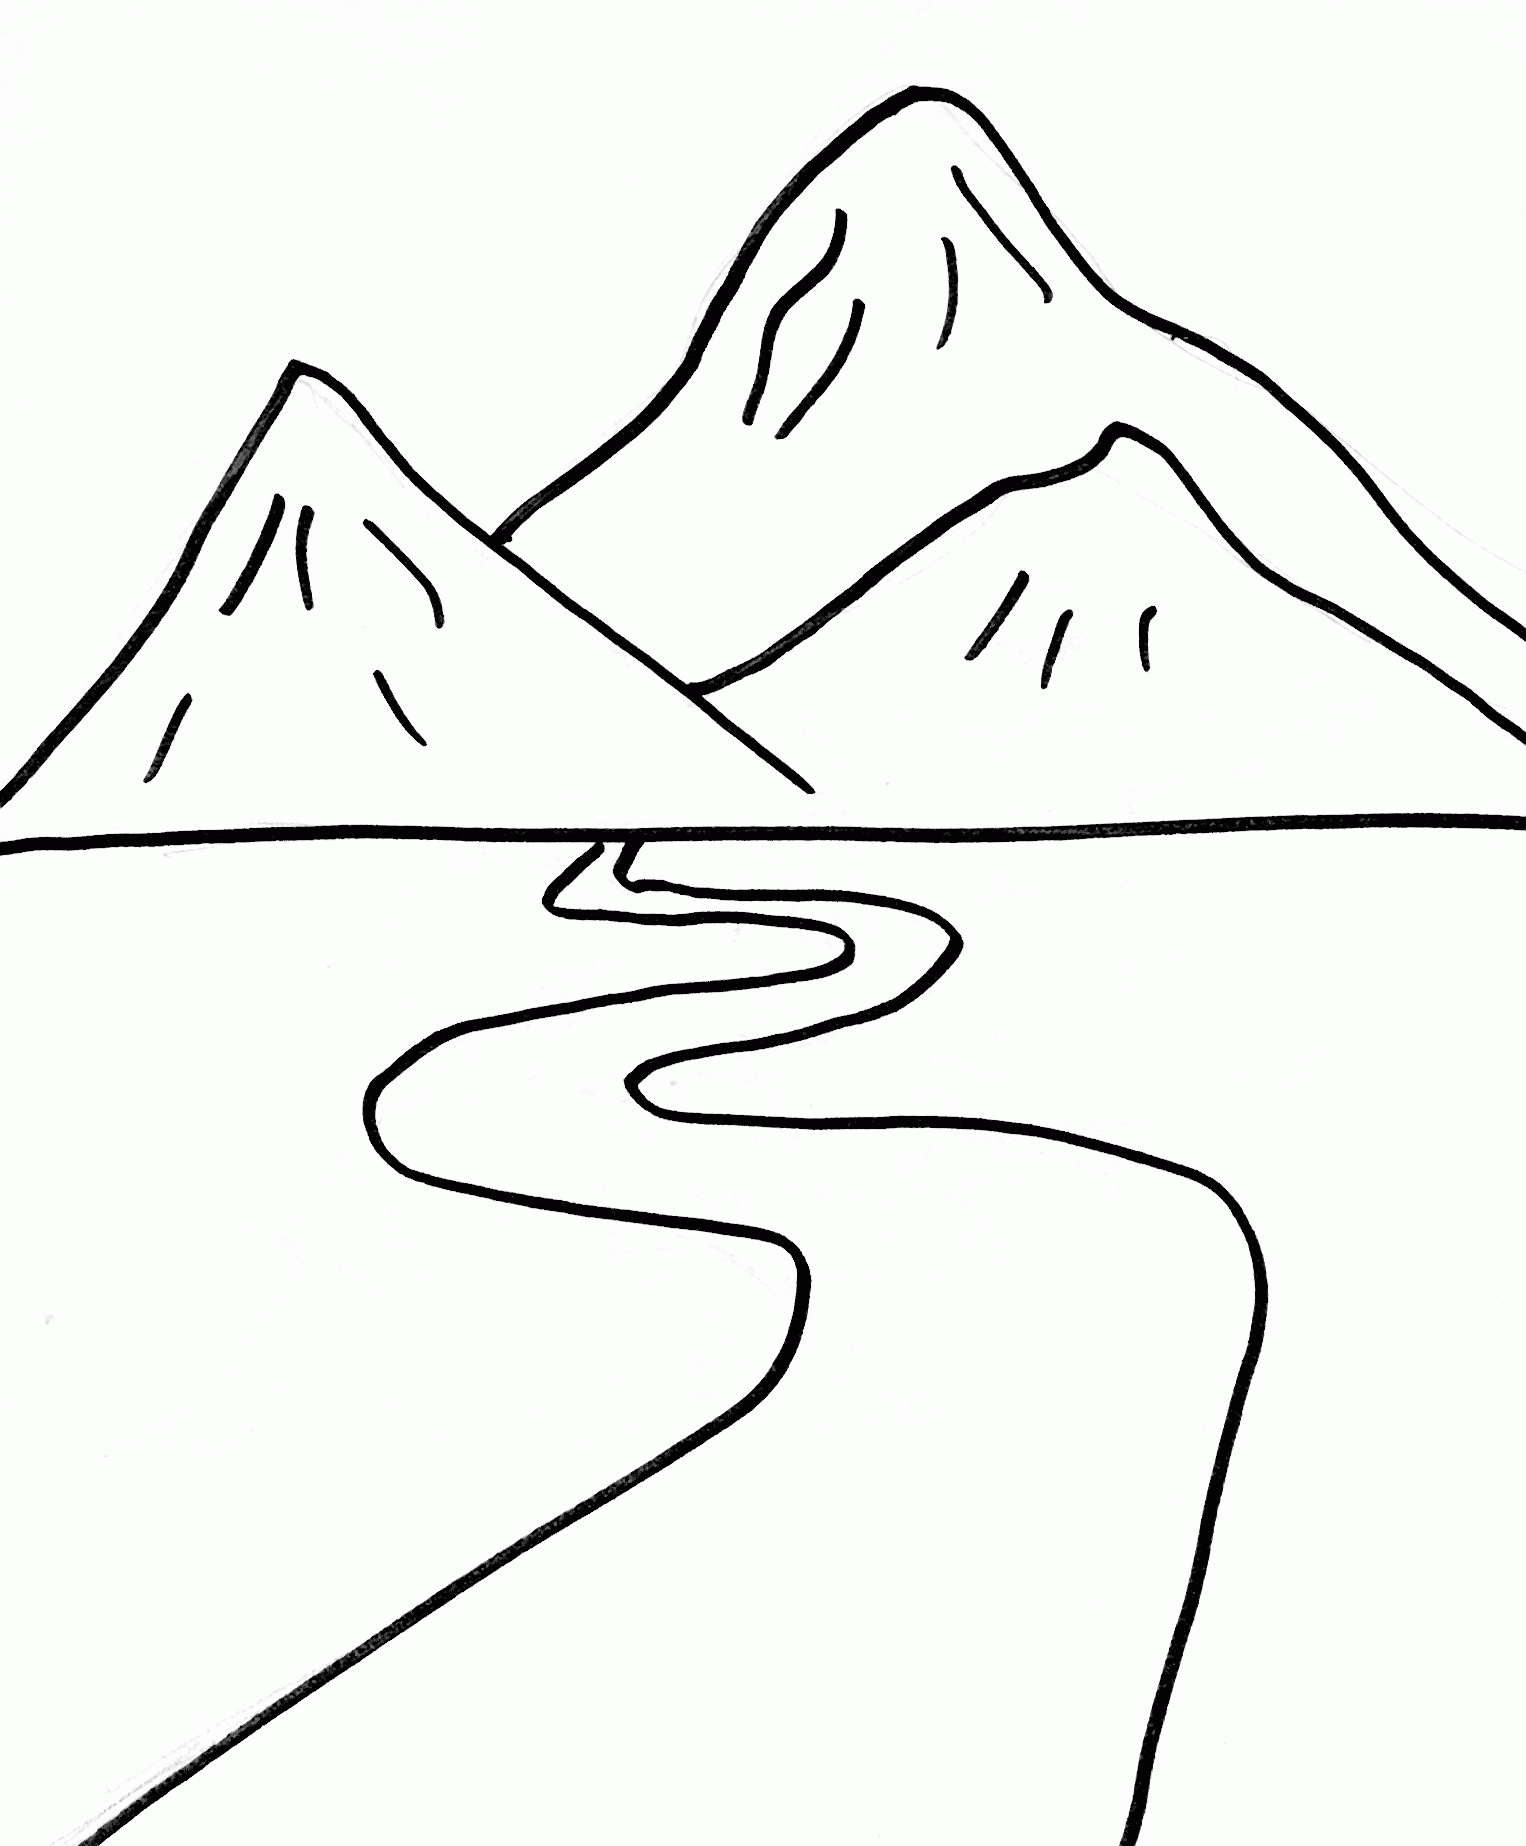 Free Coloring Pages Mountain, Download Free Coloring Pages Mountain png